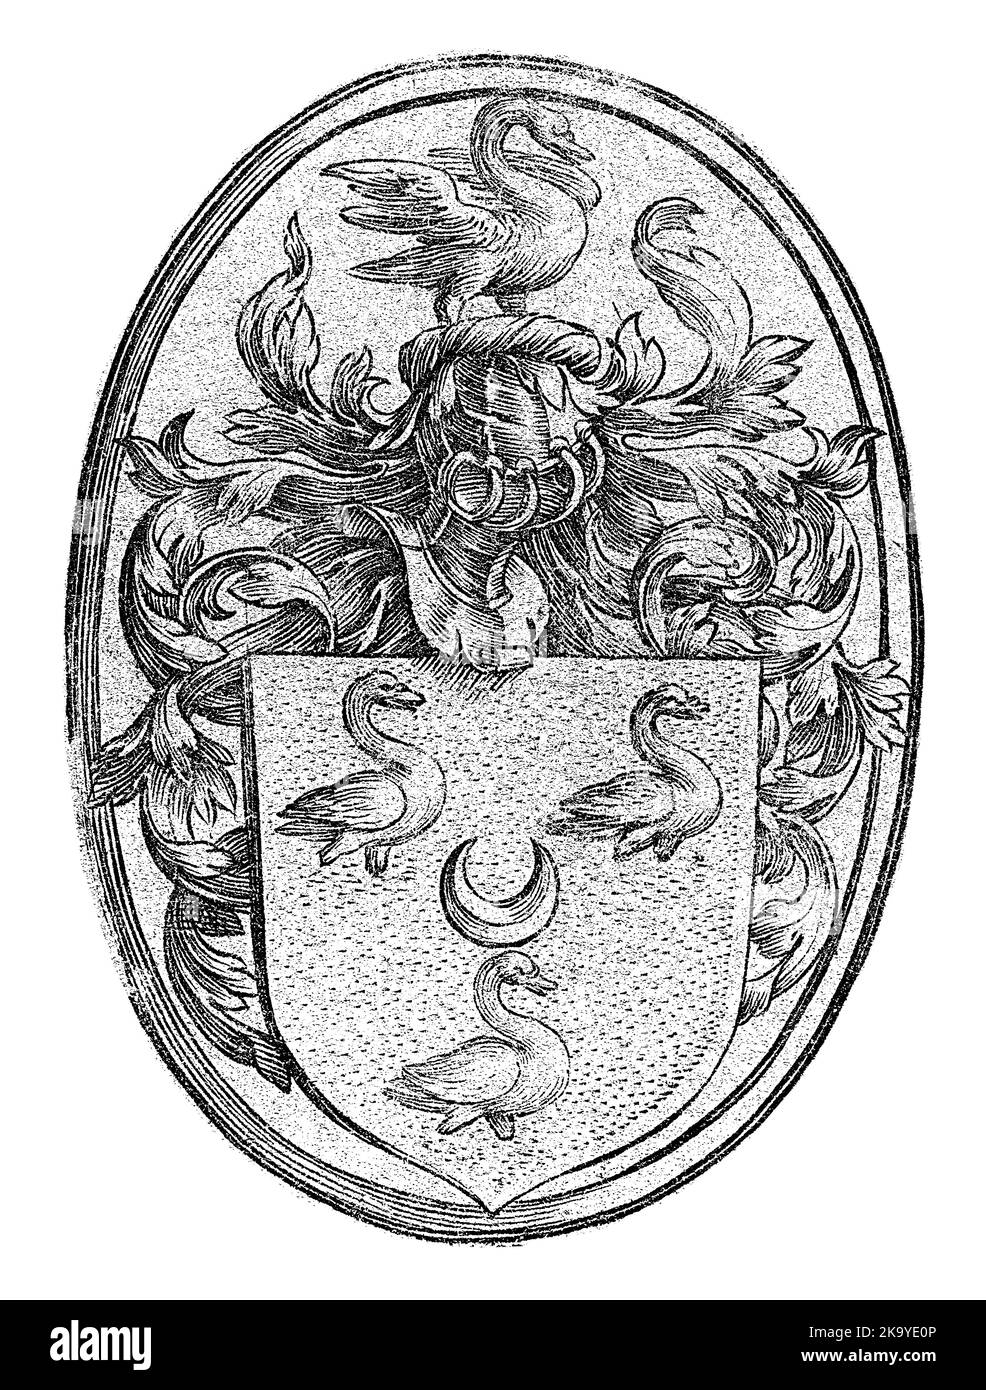 The family coat of arms of the Out family from Haarlem (a half moon surrounded by three swans) in an oval. Stock Photo